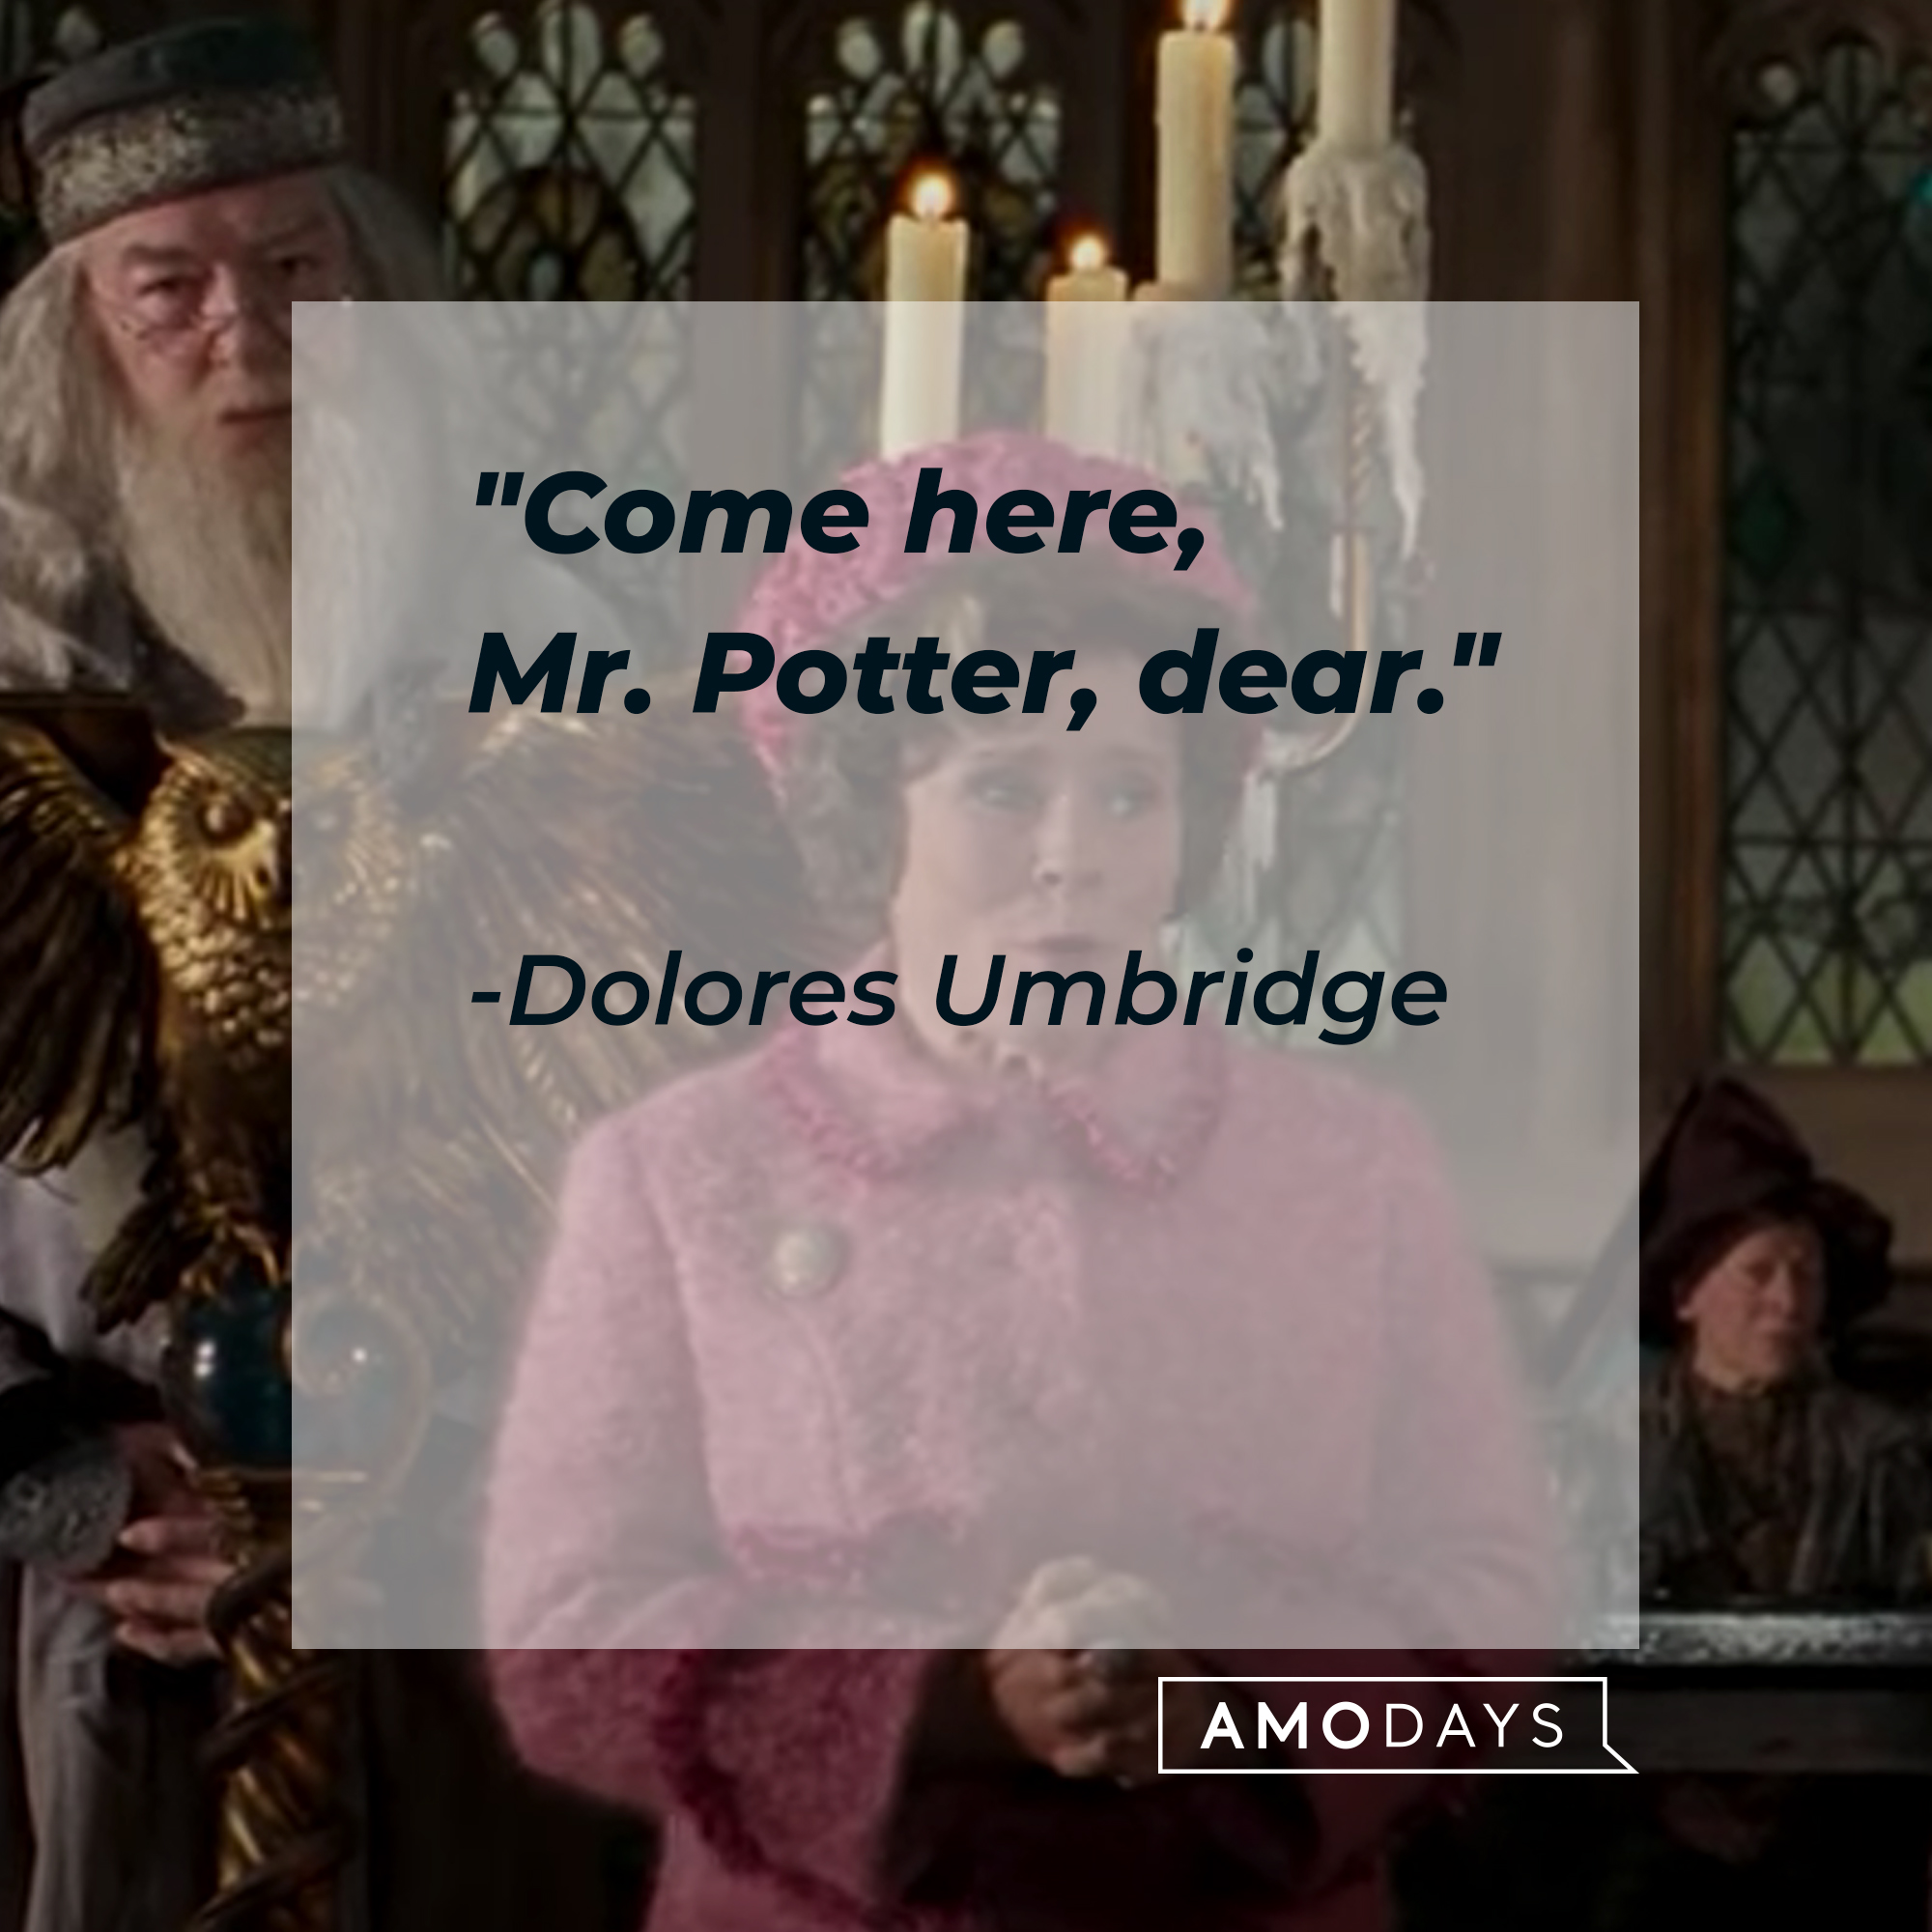 A photo of Dolores Umbridge with the quote, "Come here, Mr. Potter, dear." | Source: Facebook/harrypotter